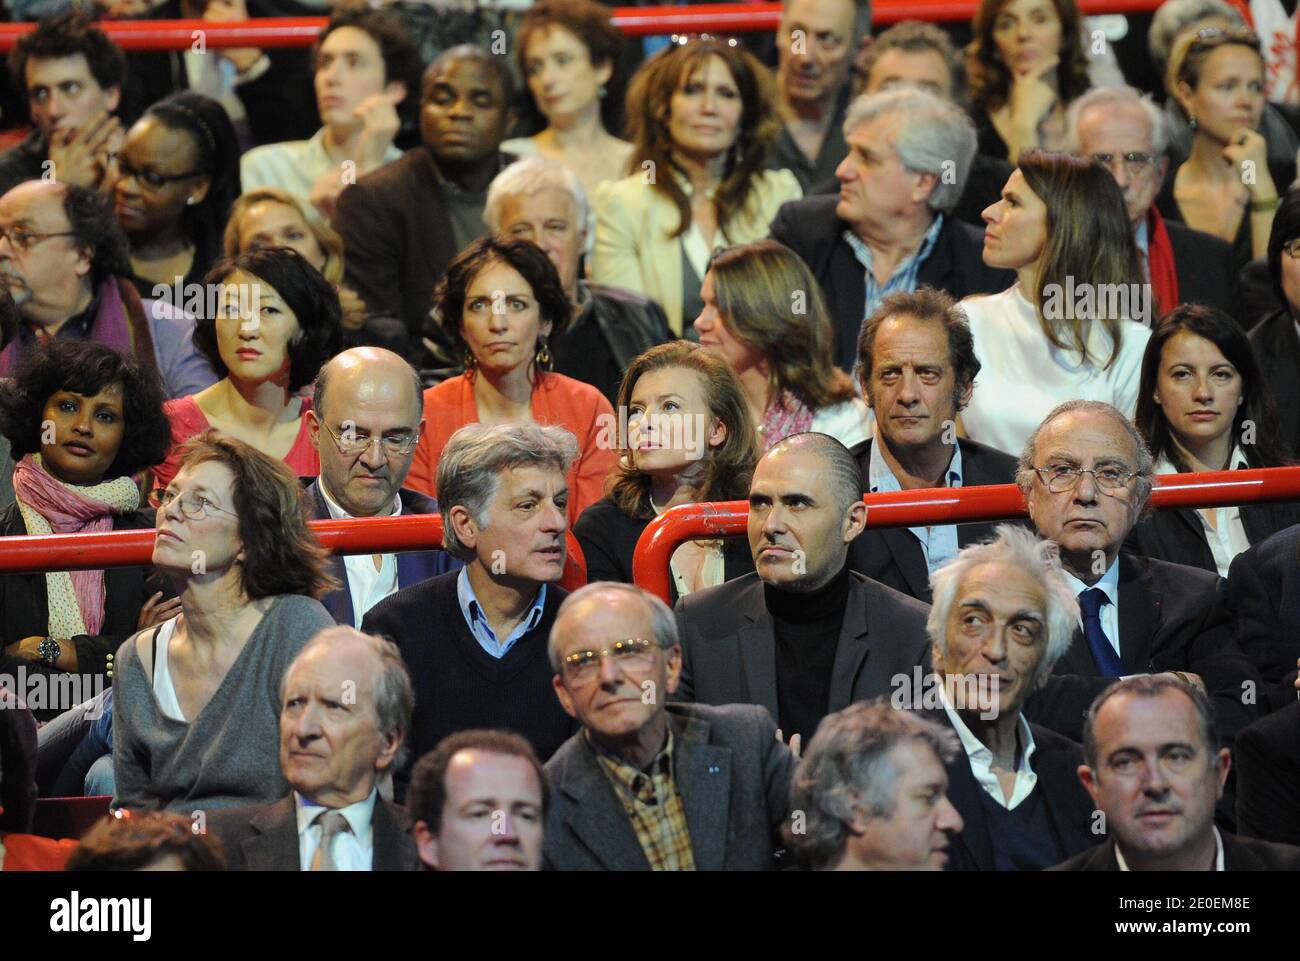 Gerard Darmon, Jane Birkin, Safia Otokore, Pierre Moscovici, Valerie Trierweiler, Vincent Lindon, behind Vincent Feltesse, Fleur Pellerin, Marisol Touraine are pictured during France's opposition Socialist Party (PS) candidate for the 2012 French Presidential election Francois Hollande's campaign meeting at the Palais Omnisports Paris-Bercy (POPB) in Paris, France on April 29, 2012. Photo by Mousse/ABACAPRESS.COM Stock Photo